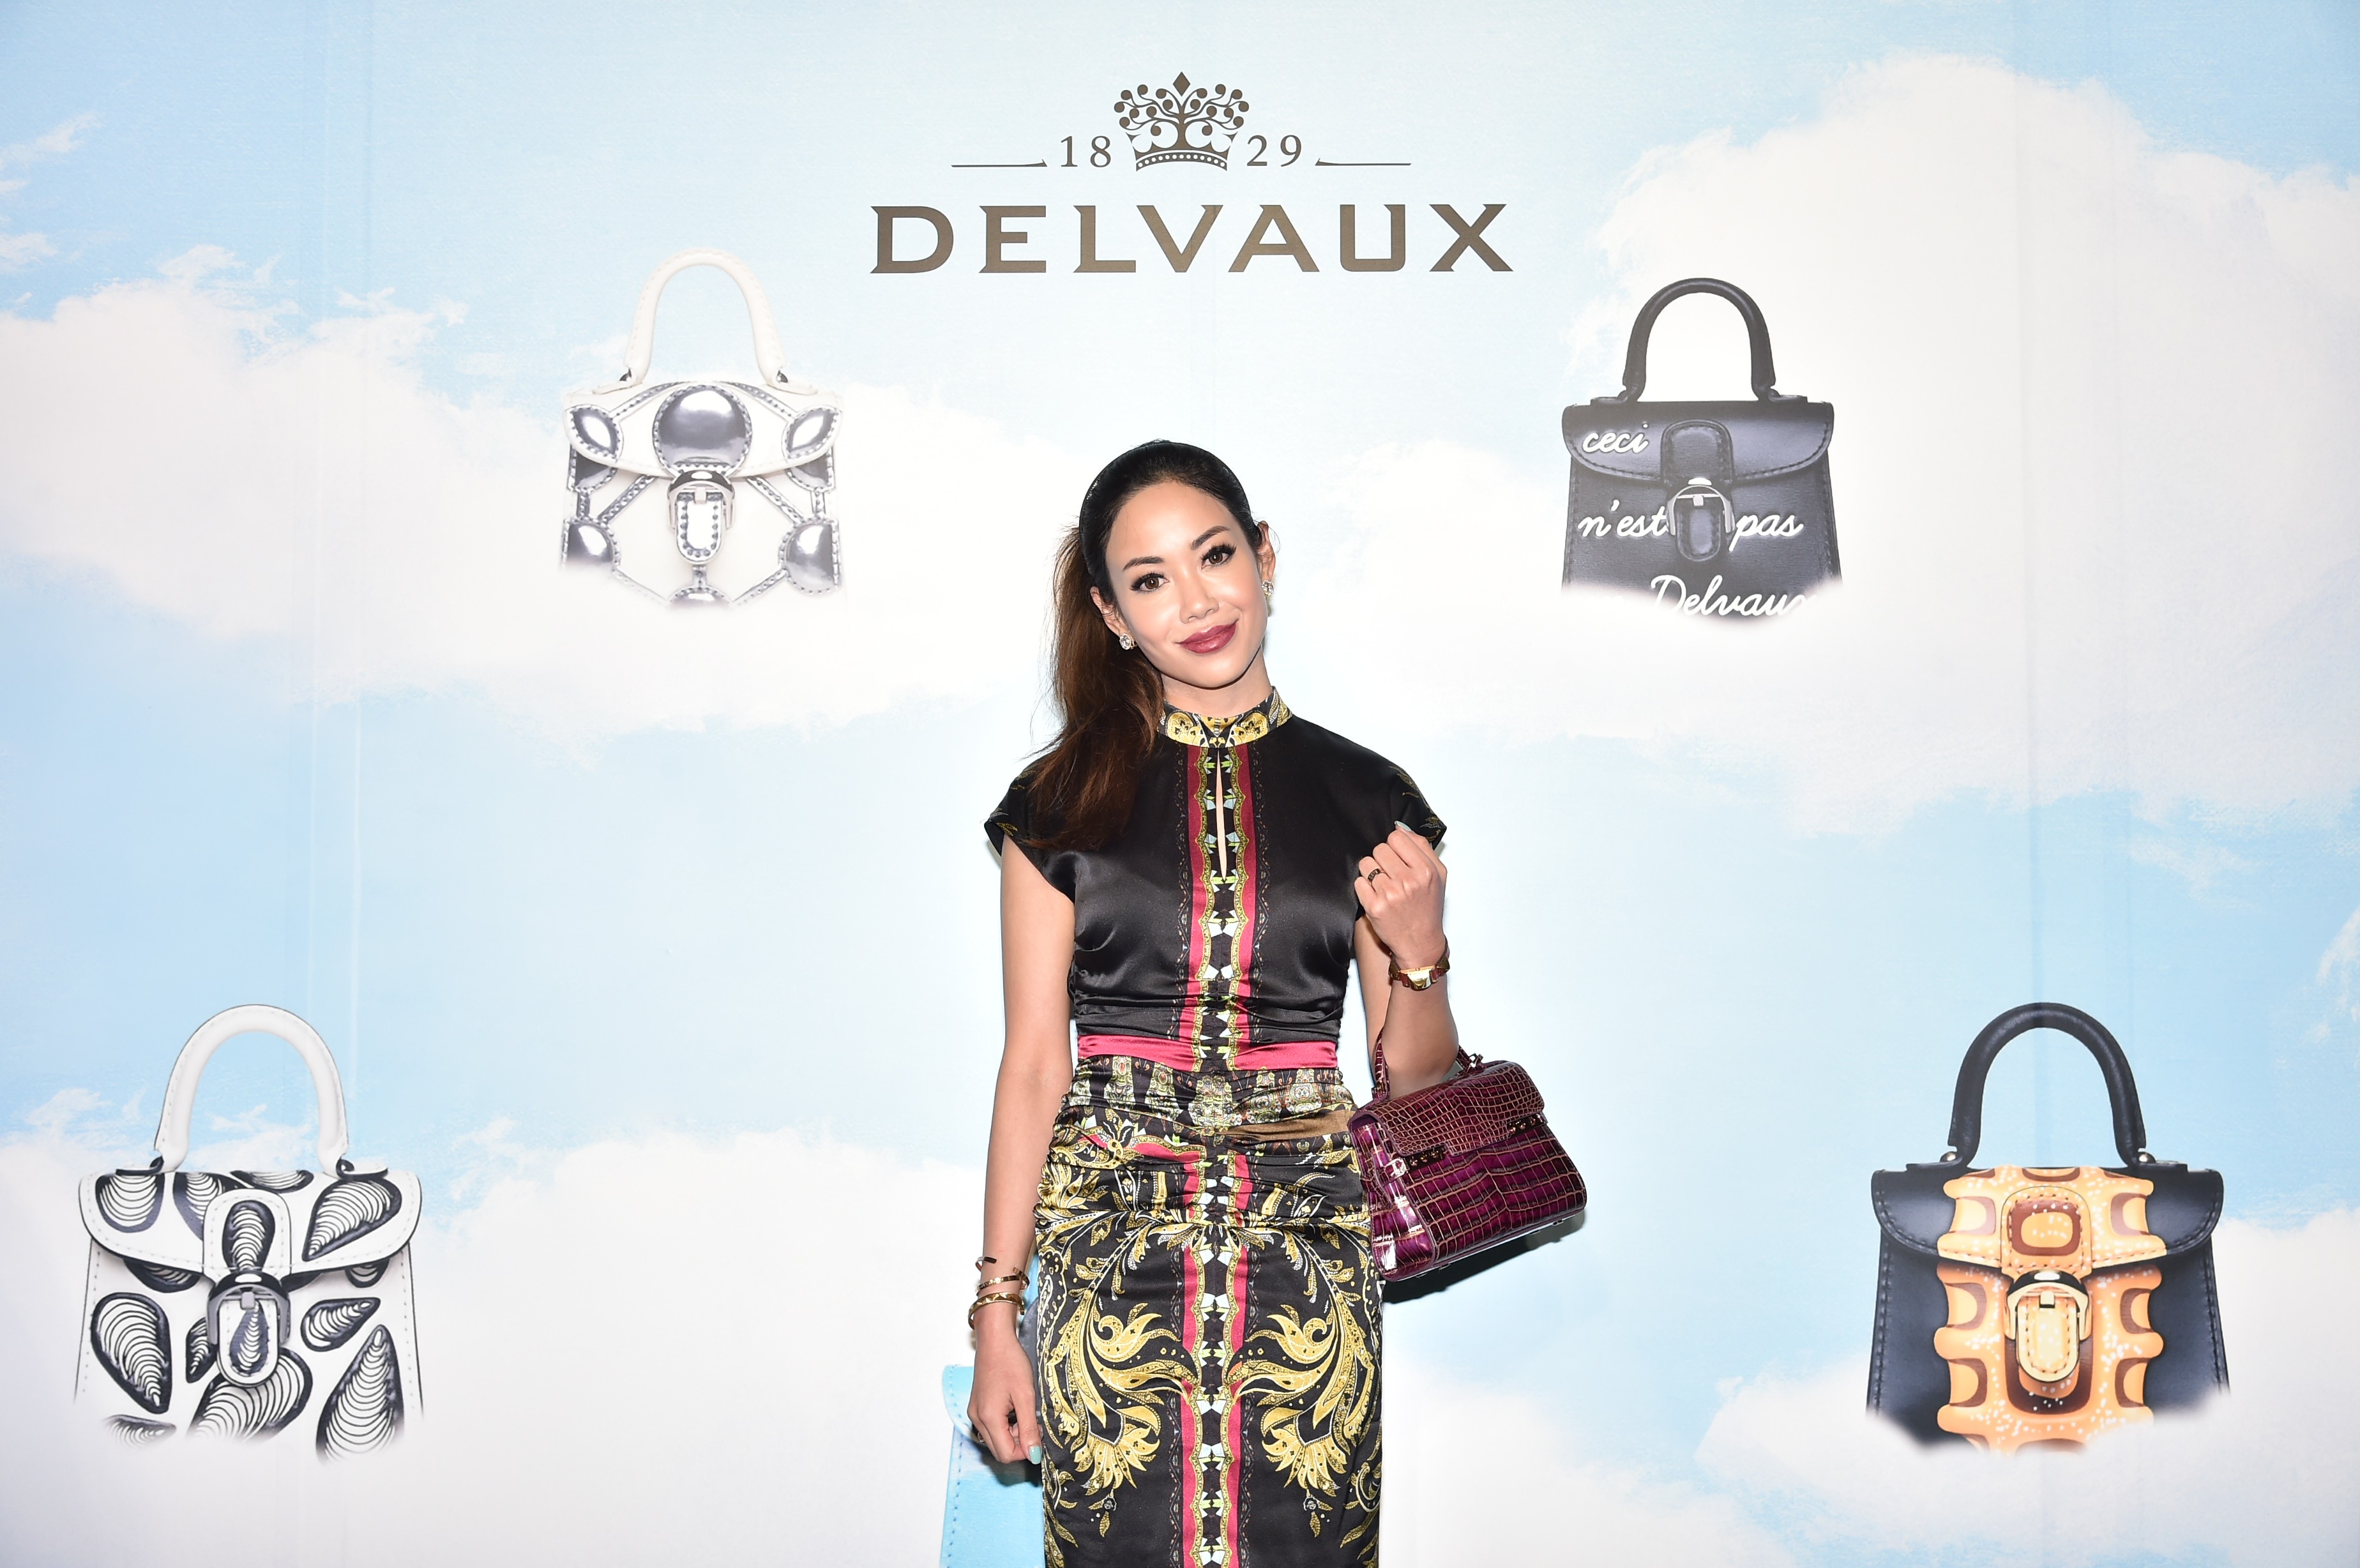 Delvaux - Friends of the House at the Delvaux